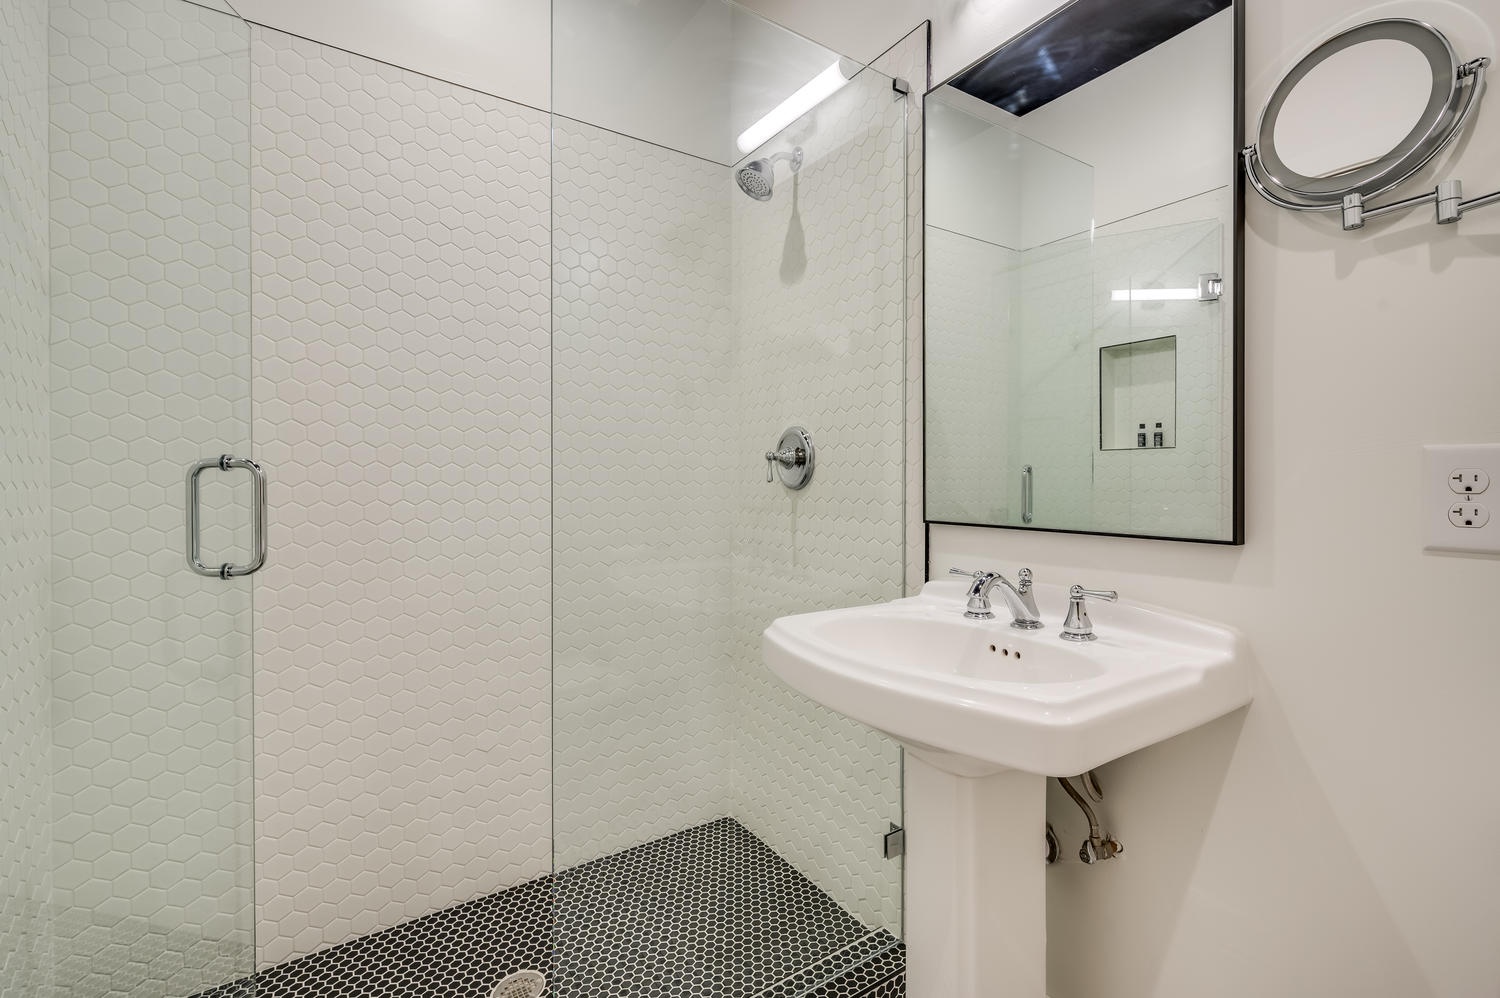 Suite 201 – The 2nd Floor Red, White & Black En Suite offers a pedestal sink with makeup mirror and luxurious Glass-Enclosed Shower